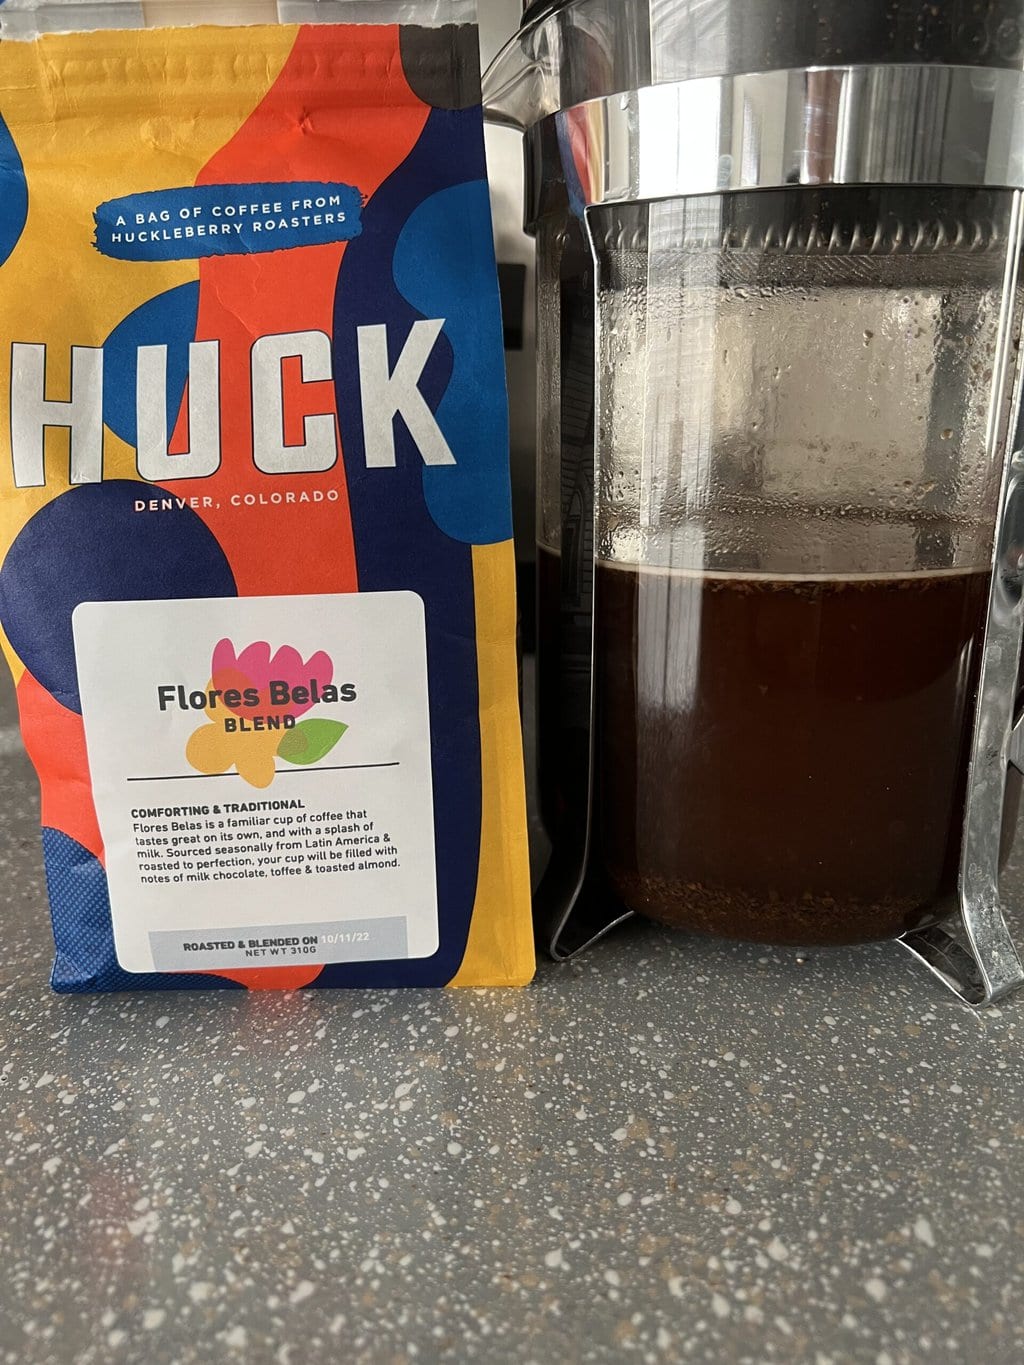 a pack of Huck Coffee next to a French press in which coffee is brewed